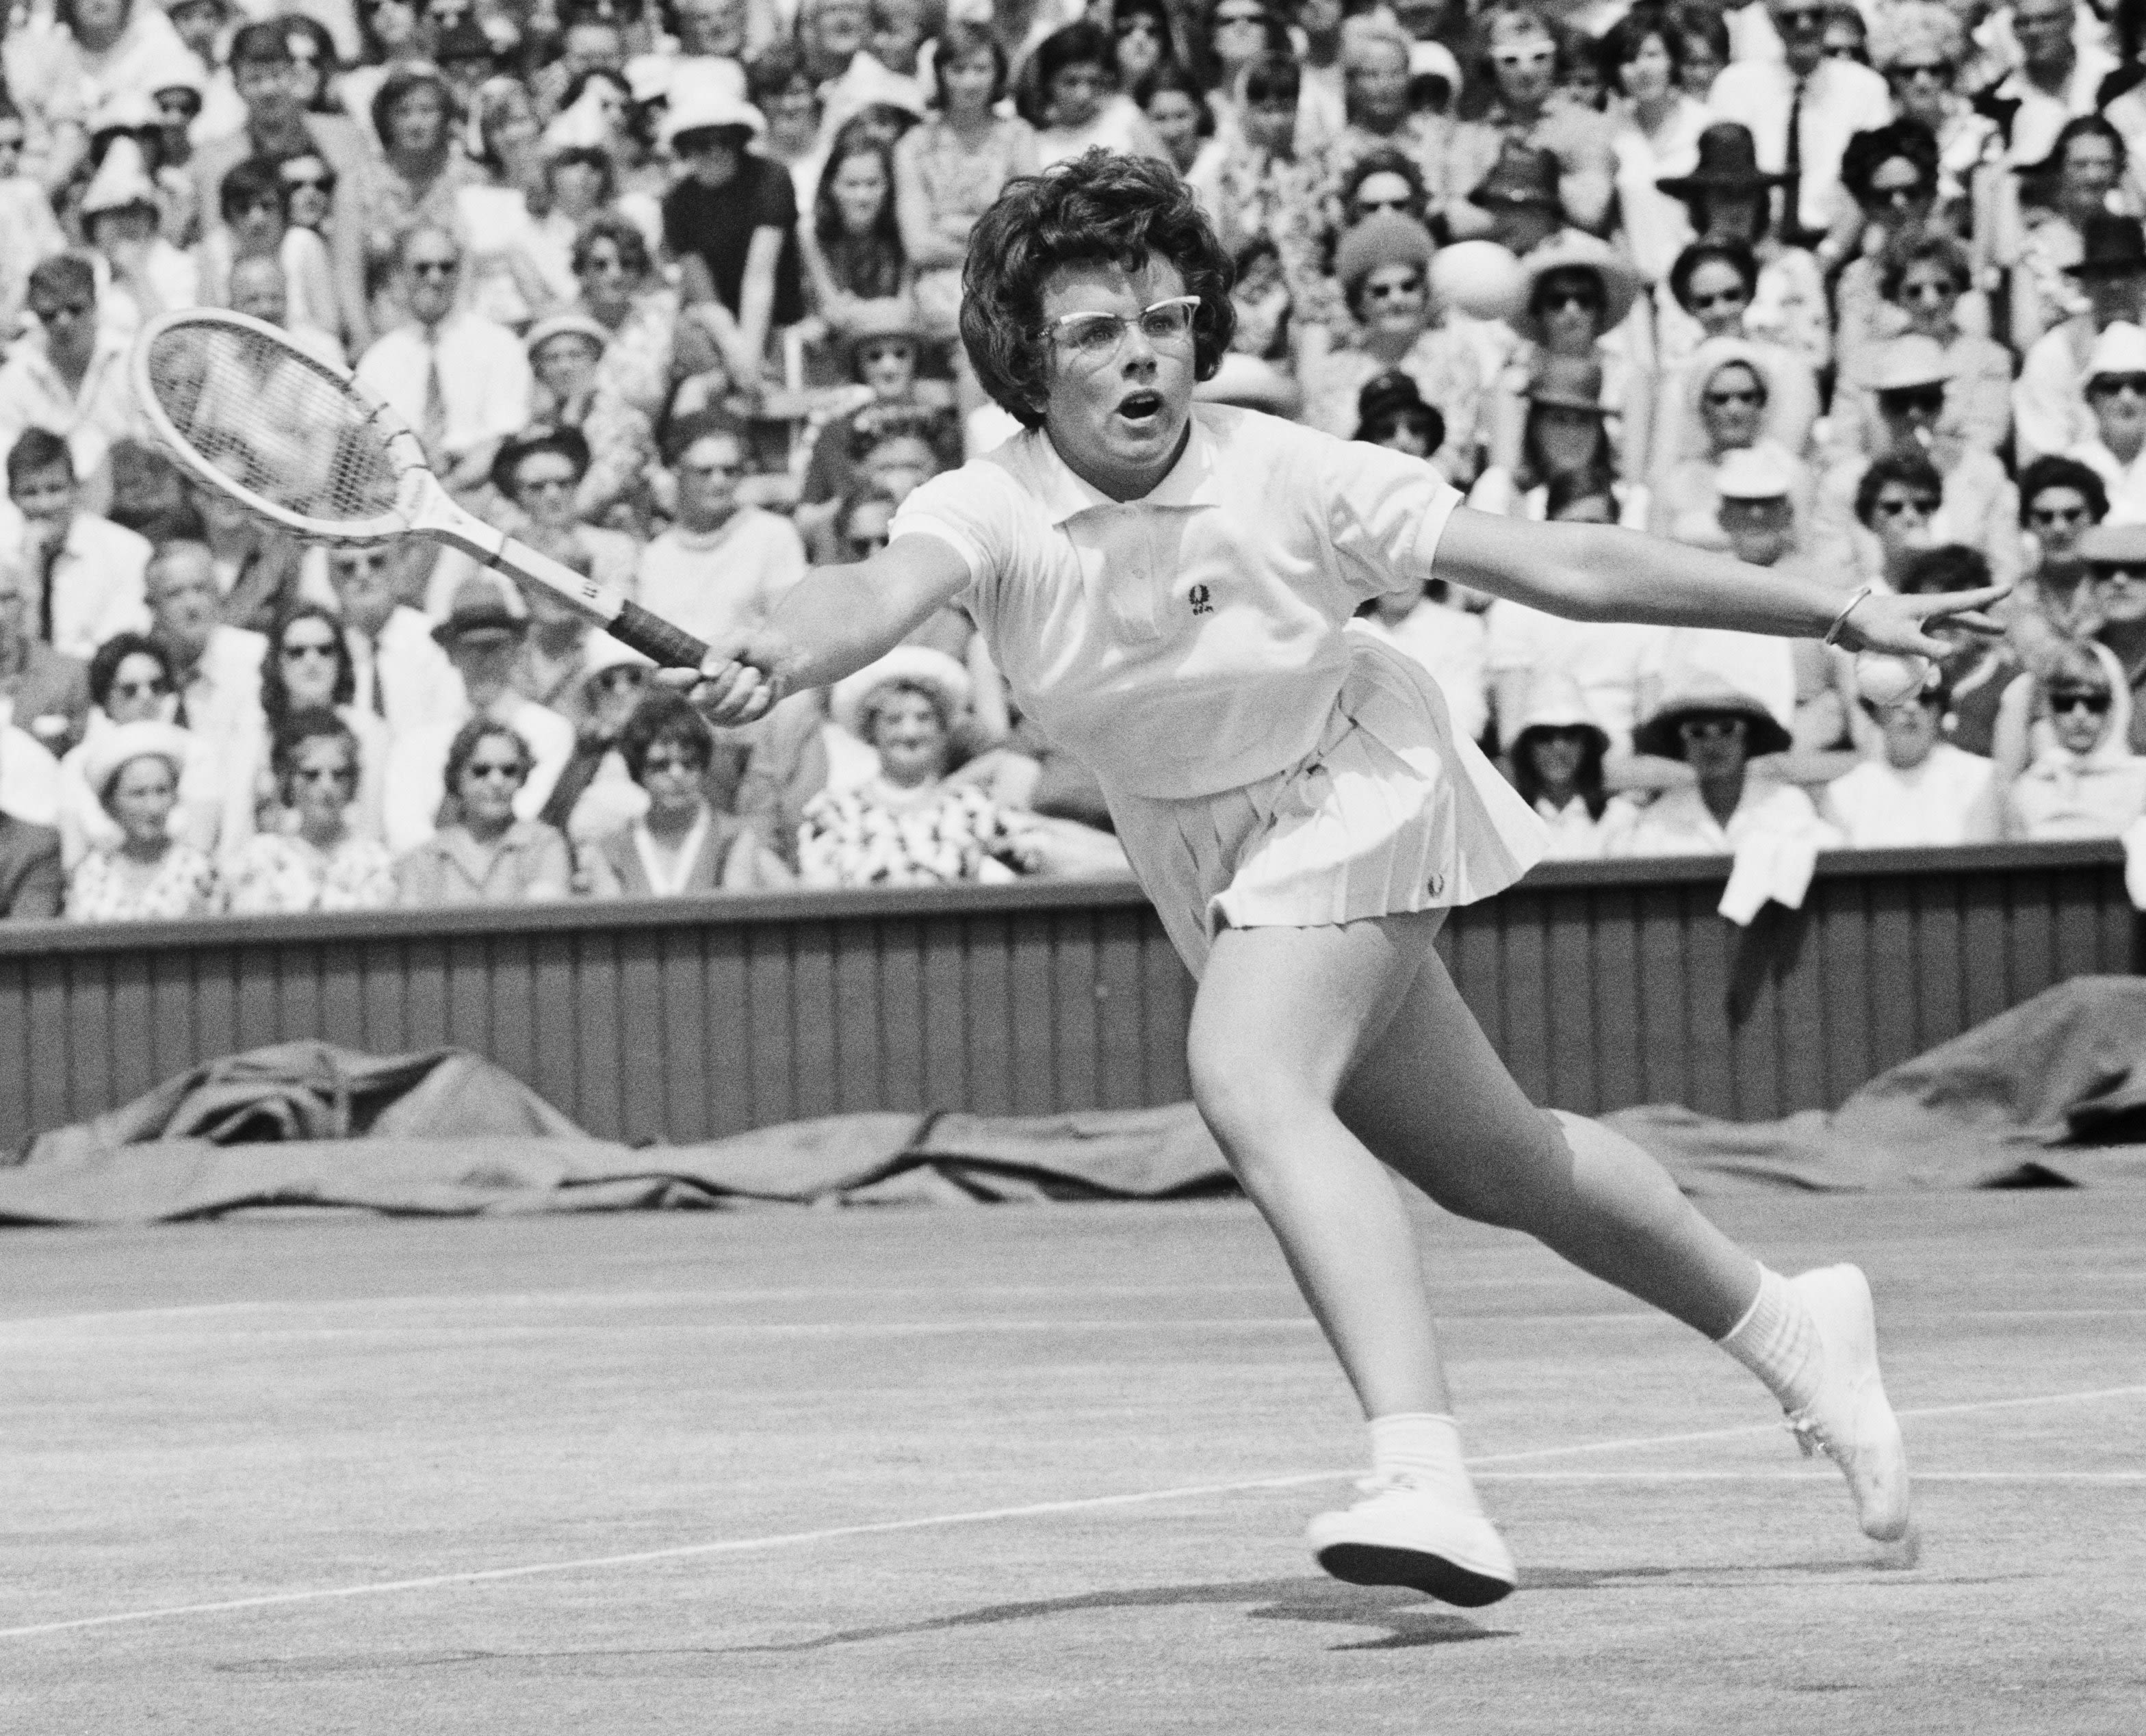 Battle of the Sexes' was 50 years ago, but King's efforts still benefit  tennis stars : NPR